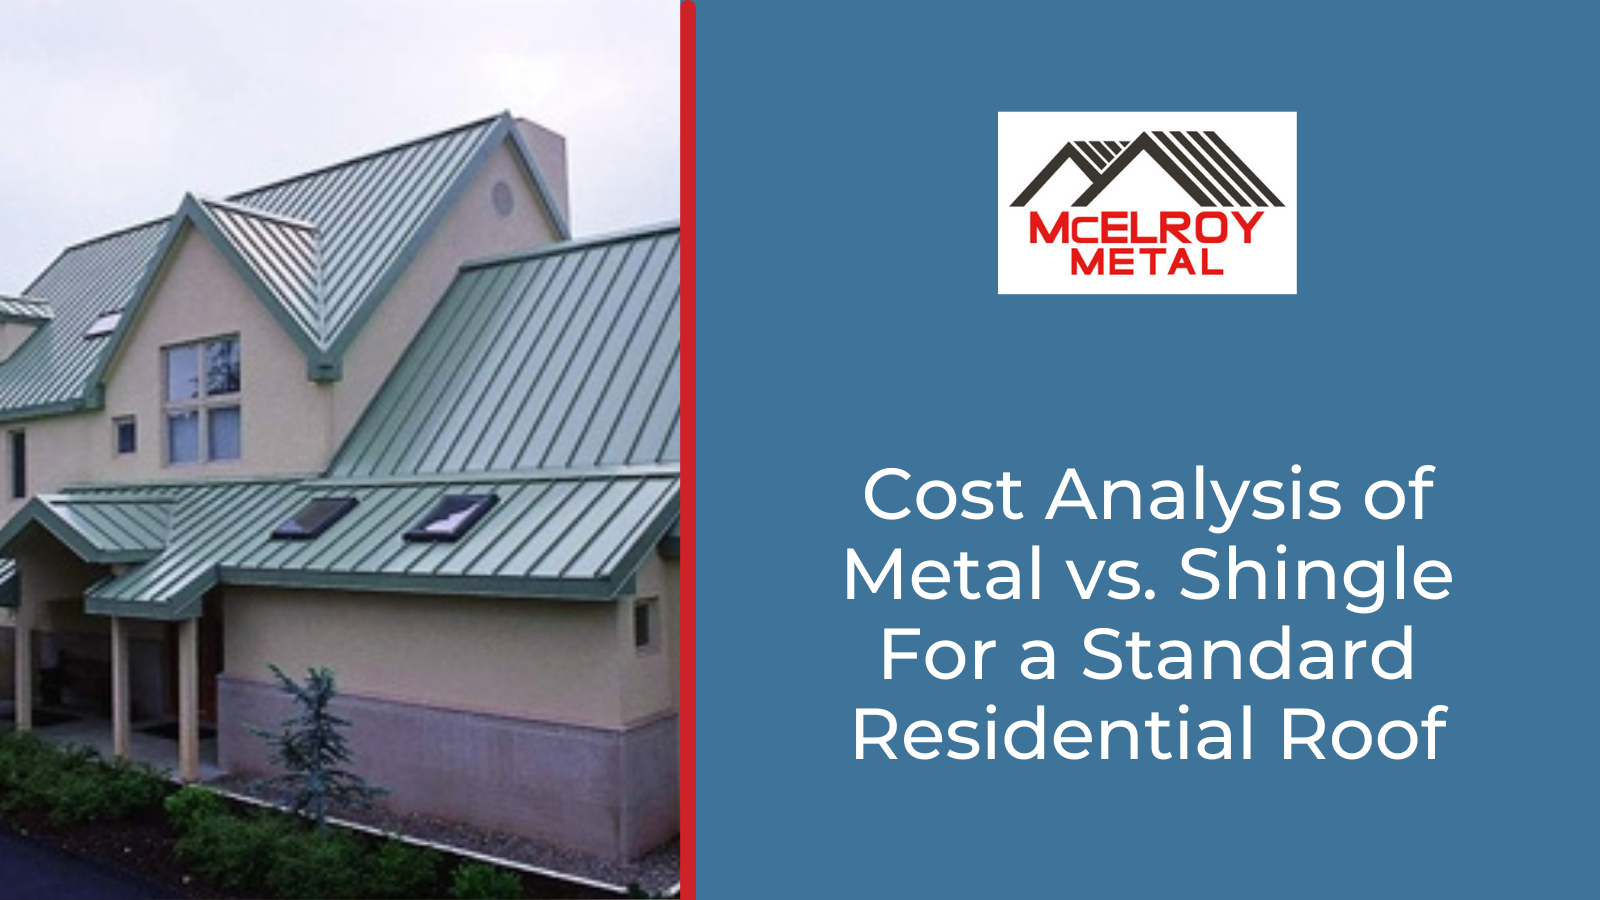 Cost Analysis of Metal vs. Shingle For a Standard Residential Roof